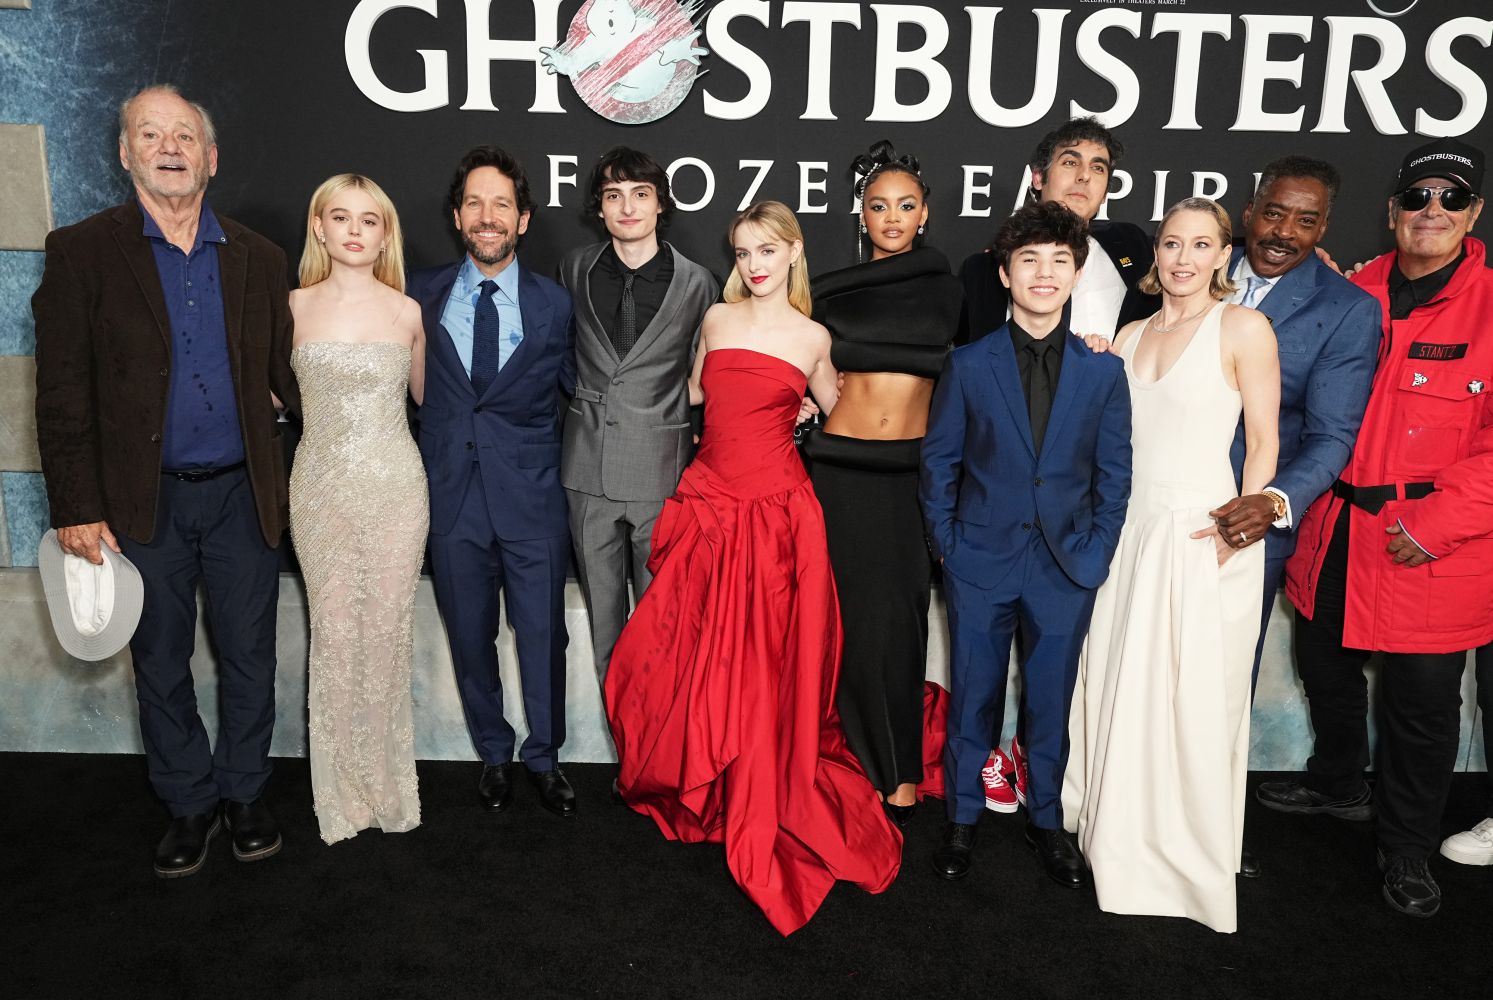 <p>Sony on Thursday rolled out the red carpet for the world premiere of Ghostbusters: Frozen Empire, the latest installment of the trilogy that mixes the original and rebooted casts.</p> <p>Many of both were on hand tonight during the event at the AMC Lincoln Square in Manhattan including the original 1984 movie’s stars Bill Murray, Dan Aykroyd, Ernie Hudson, Annie Potts and William Atherton, joined by the new gang played by Paul Rudd, Carrie Coons, McKenna Grace, Finn Wolfhard, Patton Oswalt, Celeste O’Connor and Logan Kim among others.</p> <p>In Frozen Empire, which hits theaters March 22, the Spengler family returns to where it all started – the iconic New York City firehouse – to team with the original Ghostbusters, who’ve developed a top-secret research lab to take busting ghosts to the next level. When the discovery of an ancient artifact unleashes an army of ghosts that casts a death chill upon the city, Ghostbusters new and old must join forces to protect their home and save the world from a second Ice Age.</p> <p>Gil Kenan directs the latest pic and wrote the script with Jason Reitman. Both were also in attendance tonight.</p> <p>Scroll below to check out the photos from the red carpet.</p>